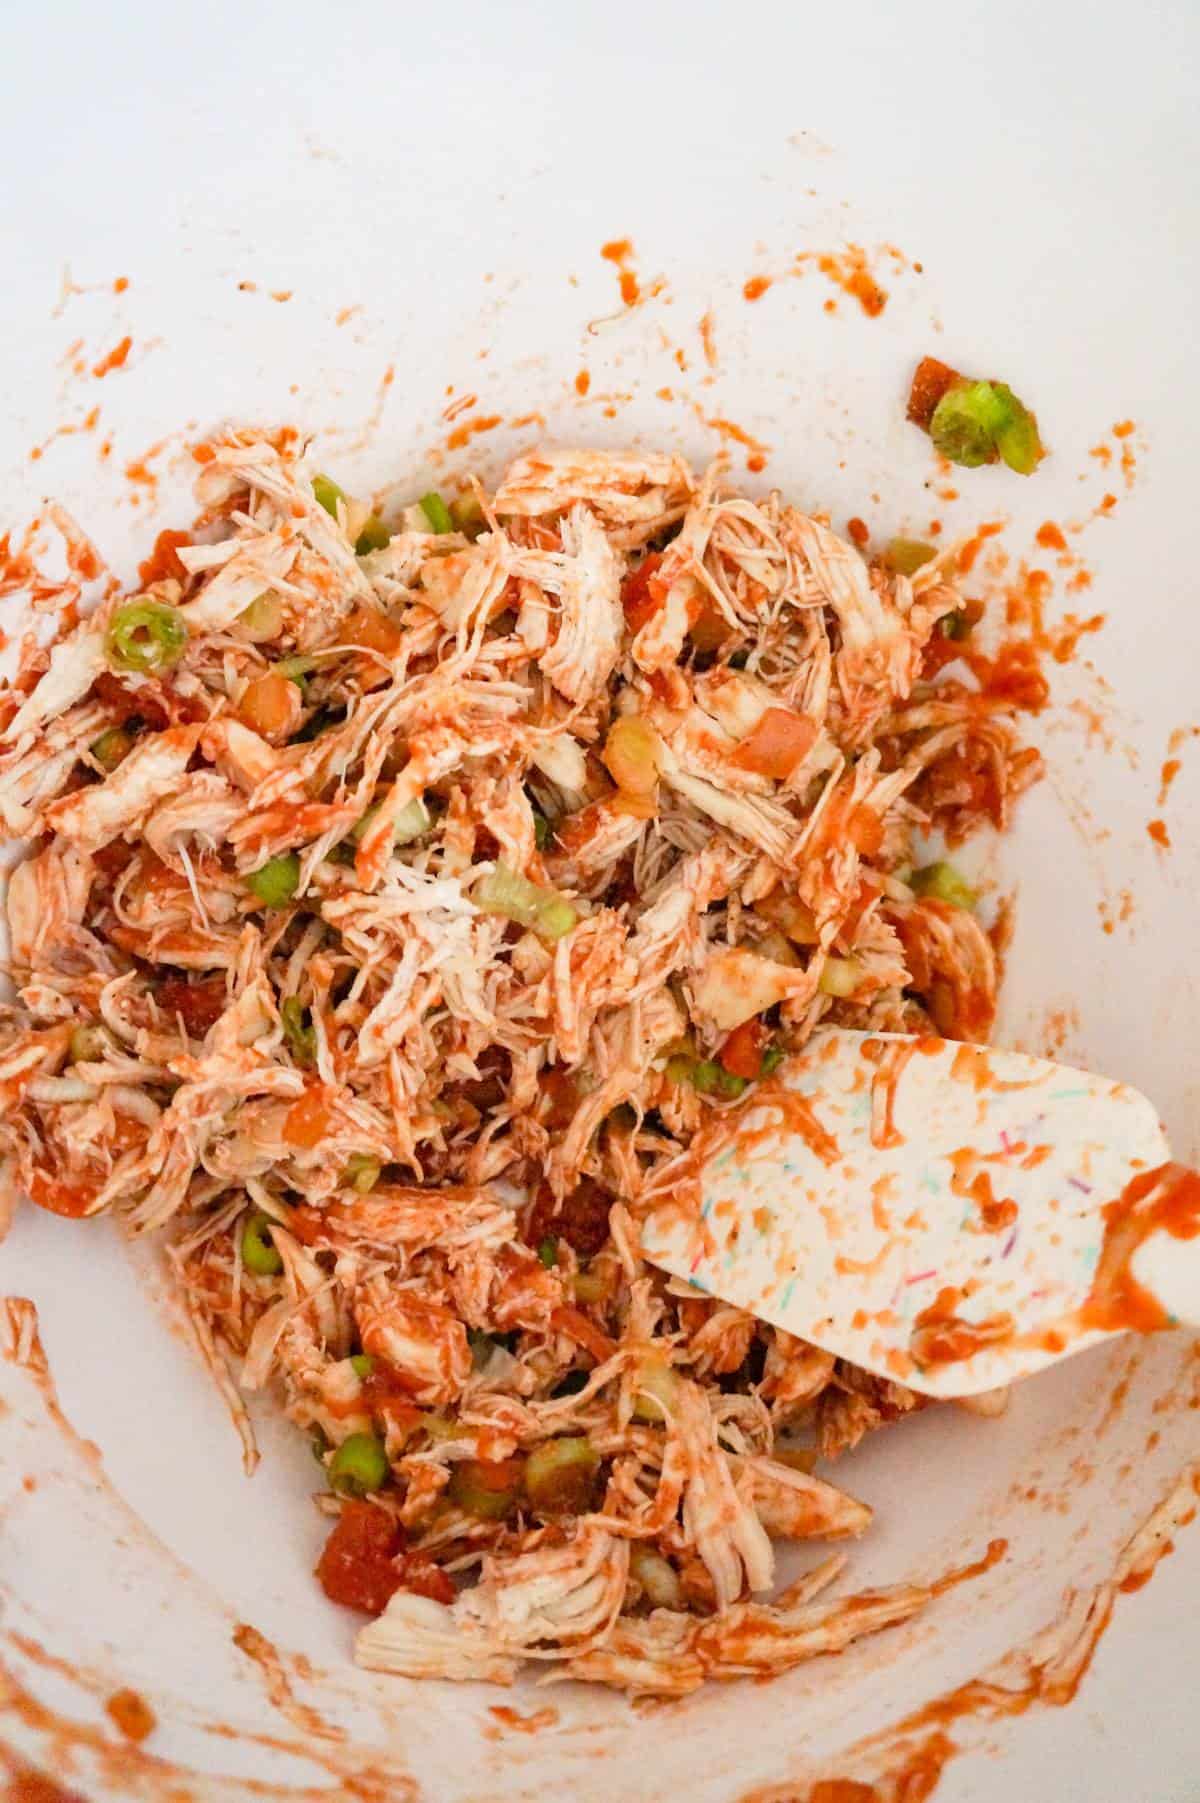 shredded chicken, chopped green onions and salsa mixture